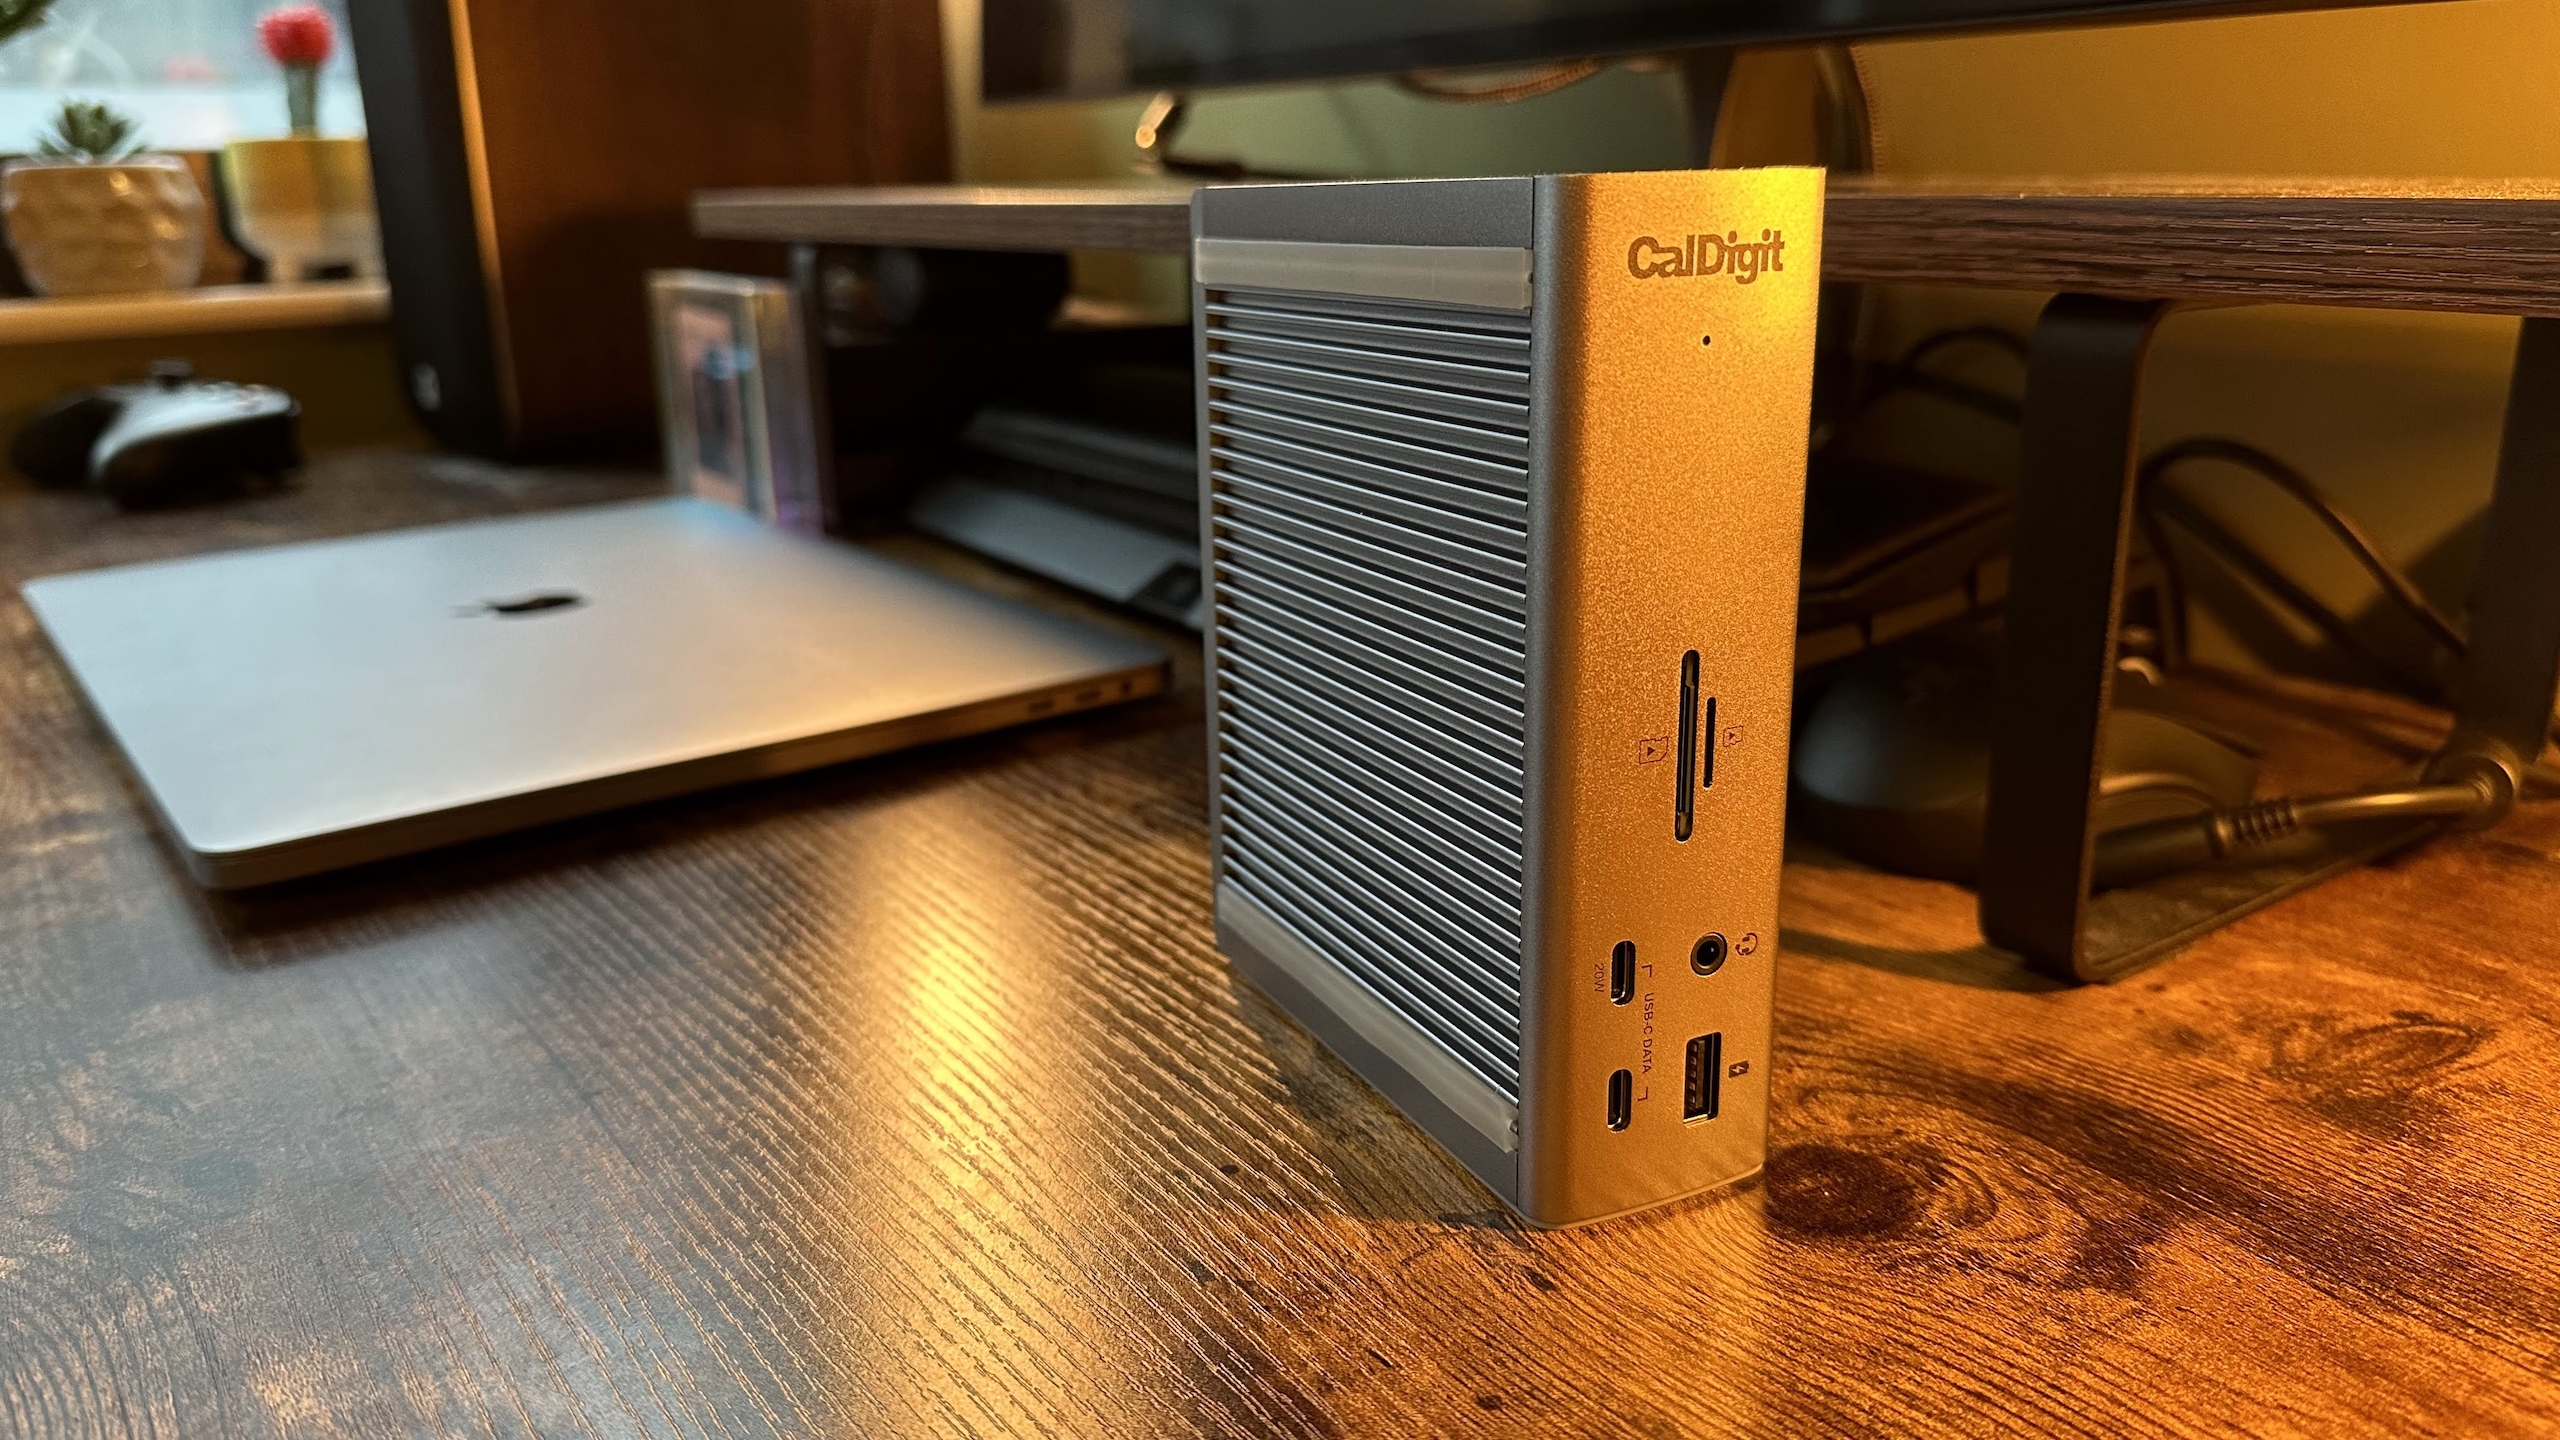 CalDigit's TS4 Thunderbolt 4 Dock offers 18 ports for your Mac